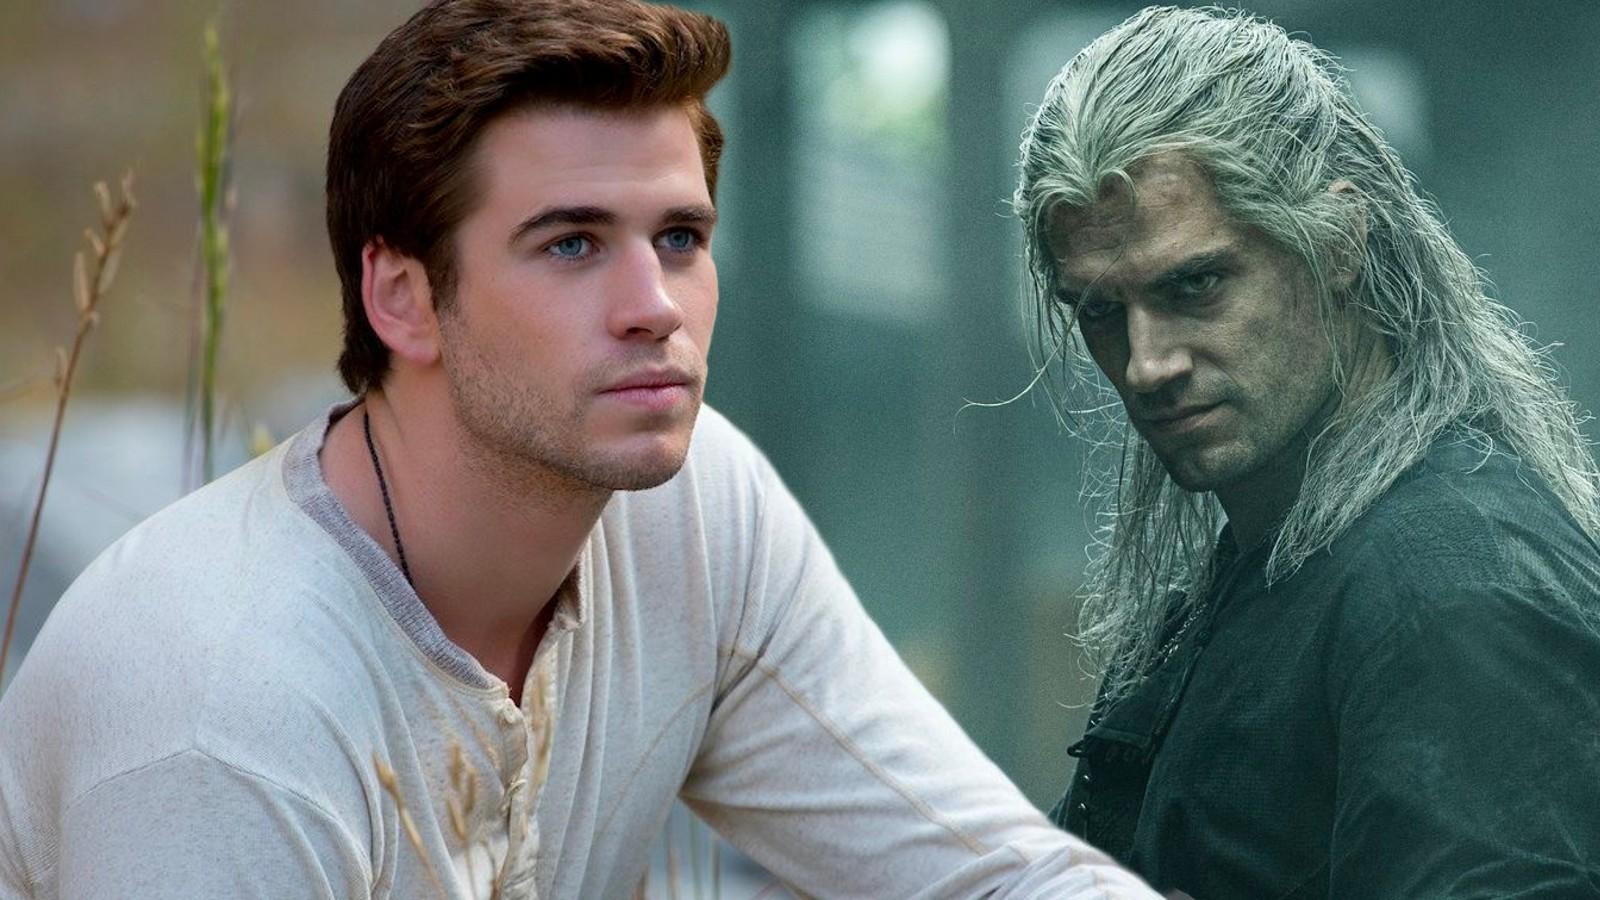 Why is Henry Cavill Being Replaced by Liam Hemsworth in 'The Witcher'?